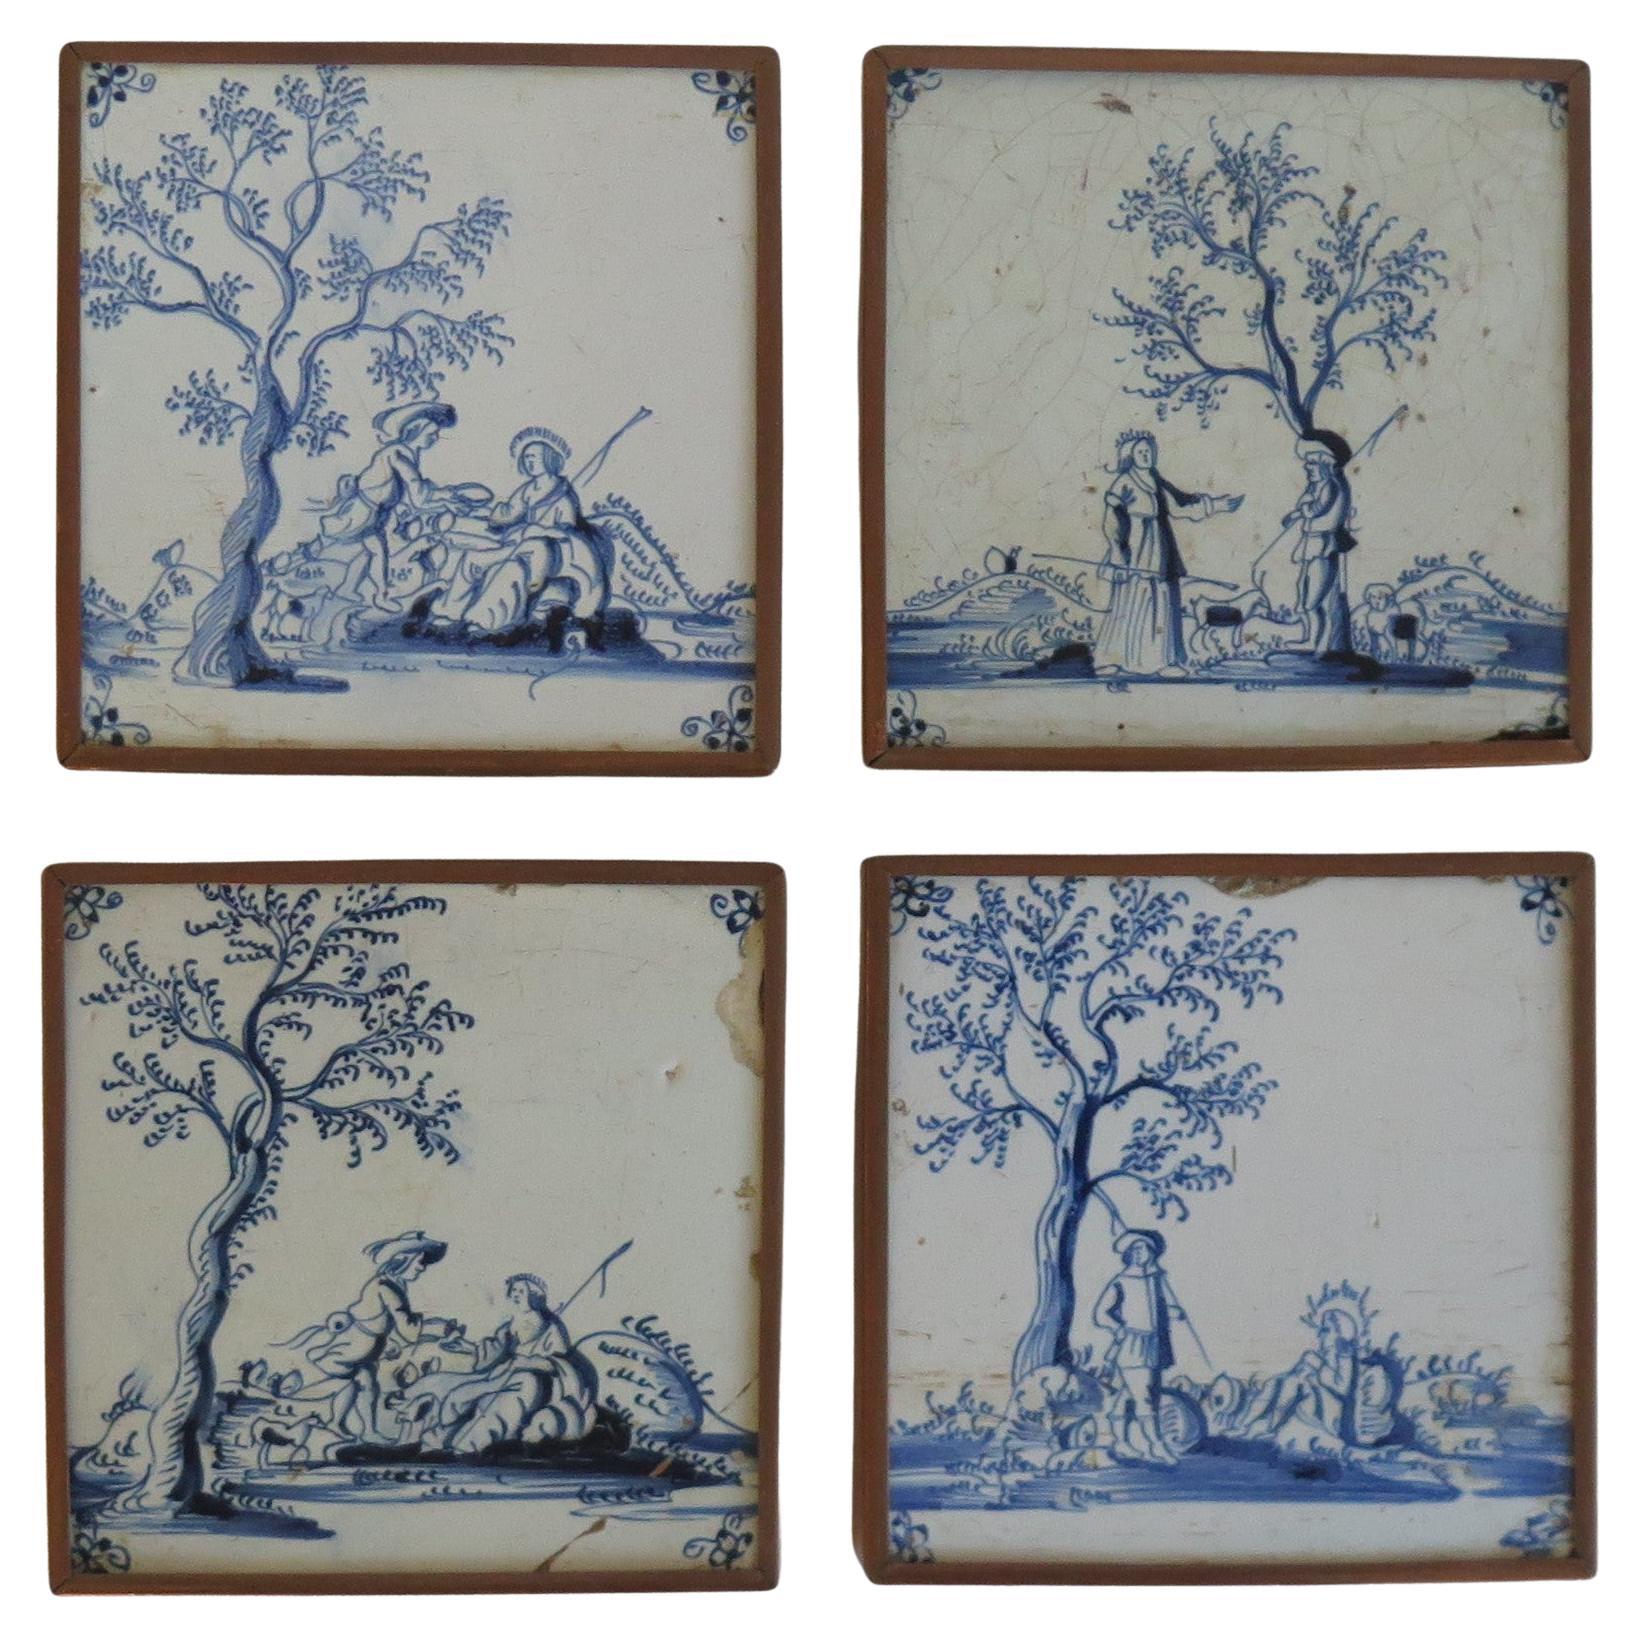 Four fine early Delft Blue and White Wall Tiles in Copper frames, Ca 1700